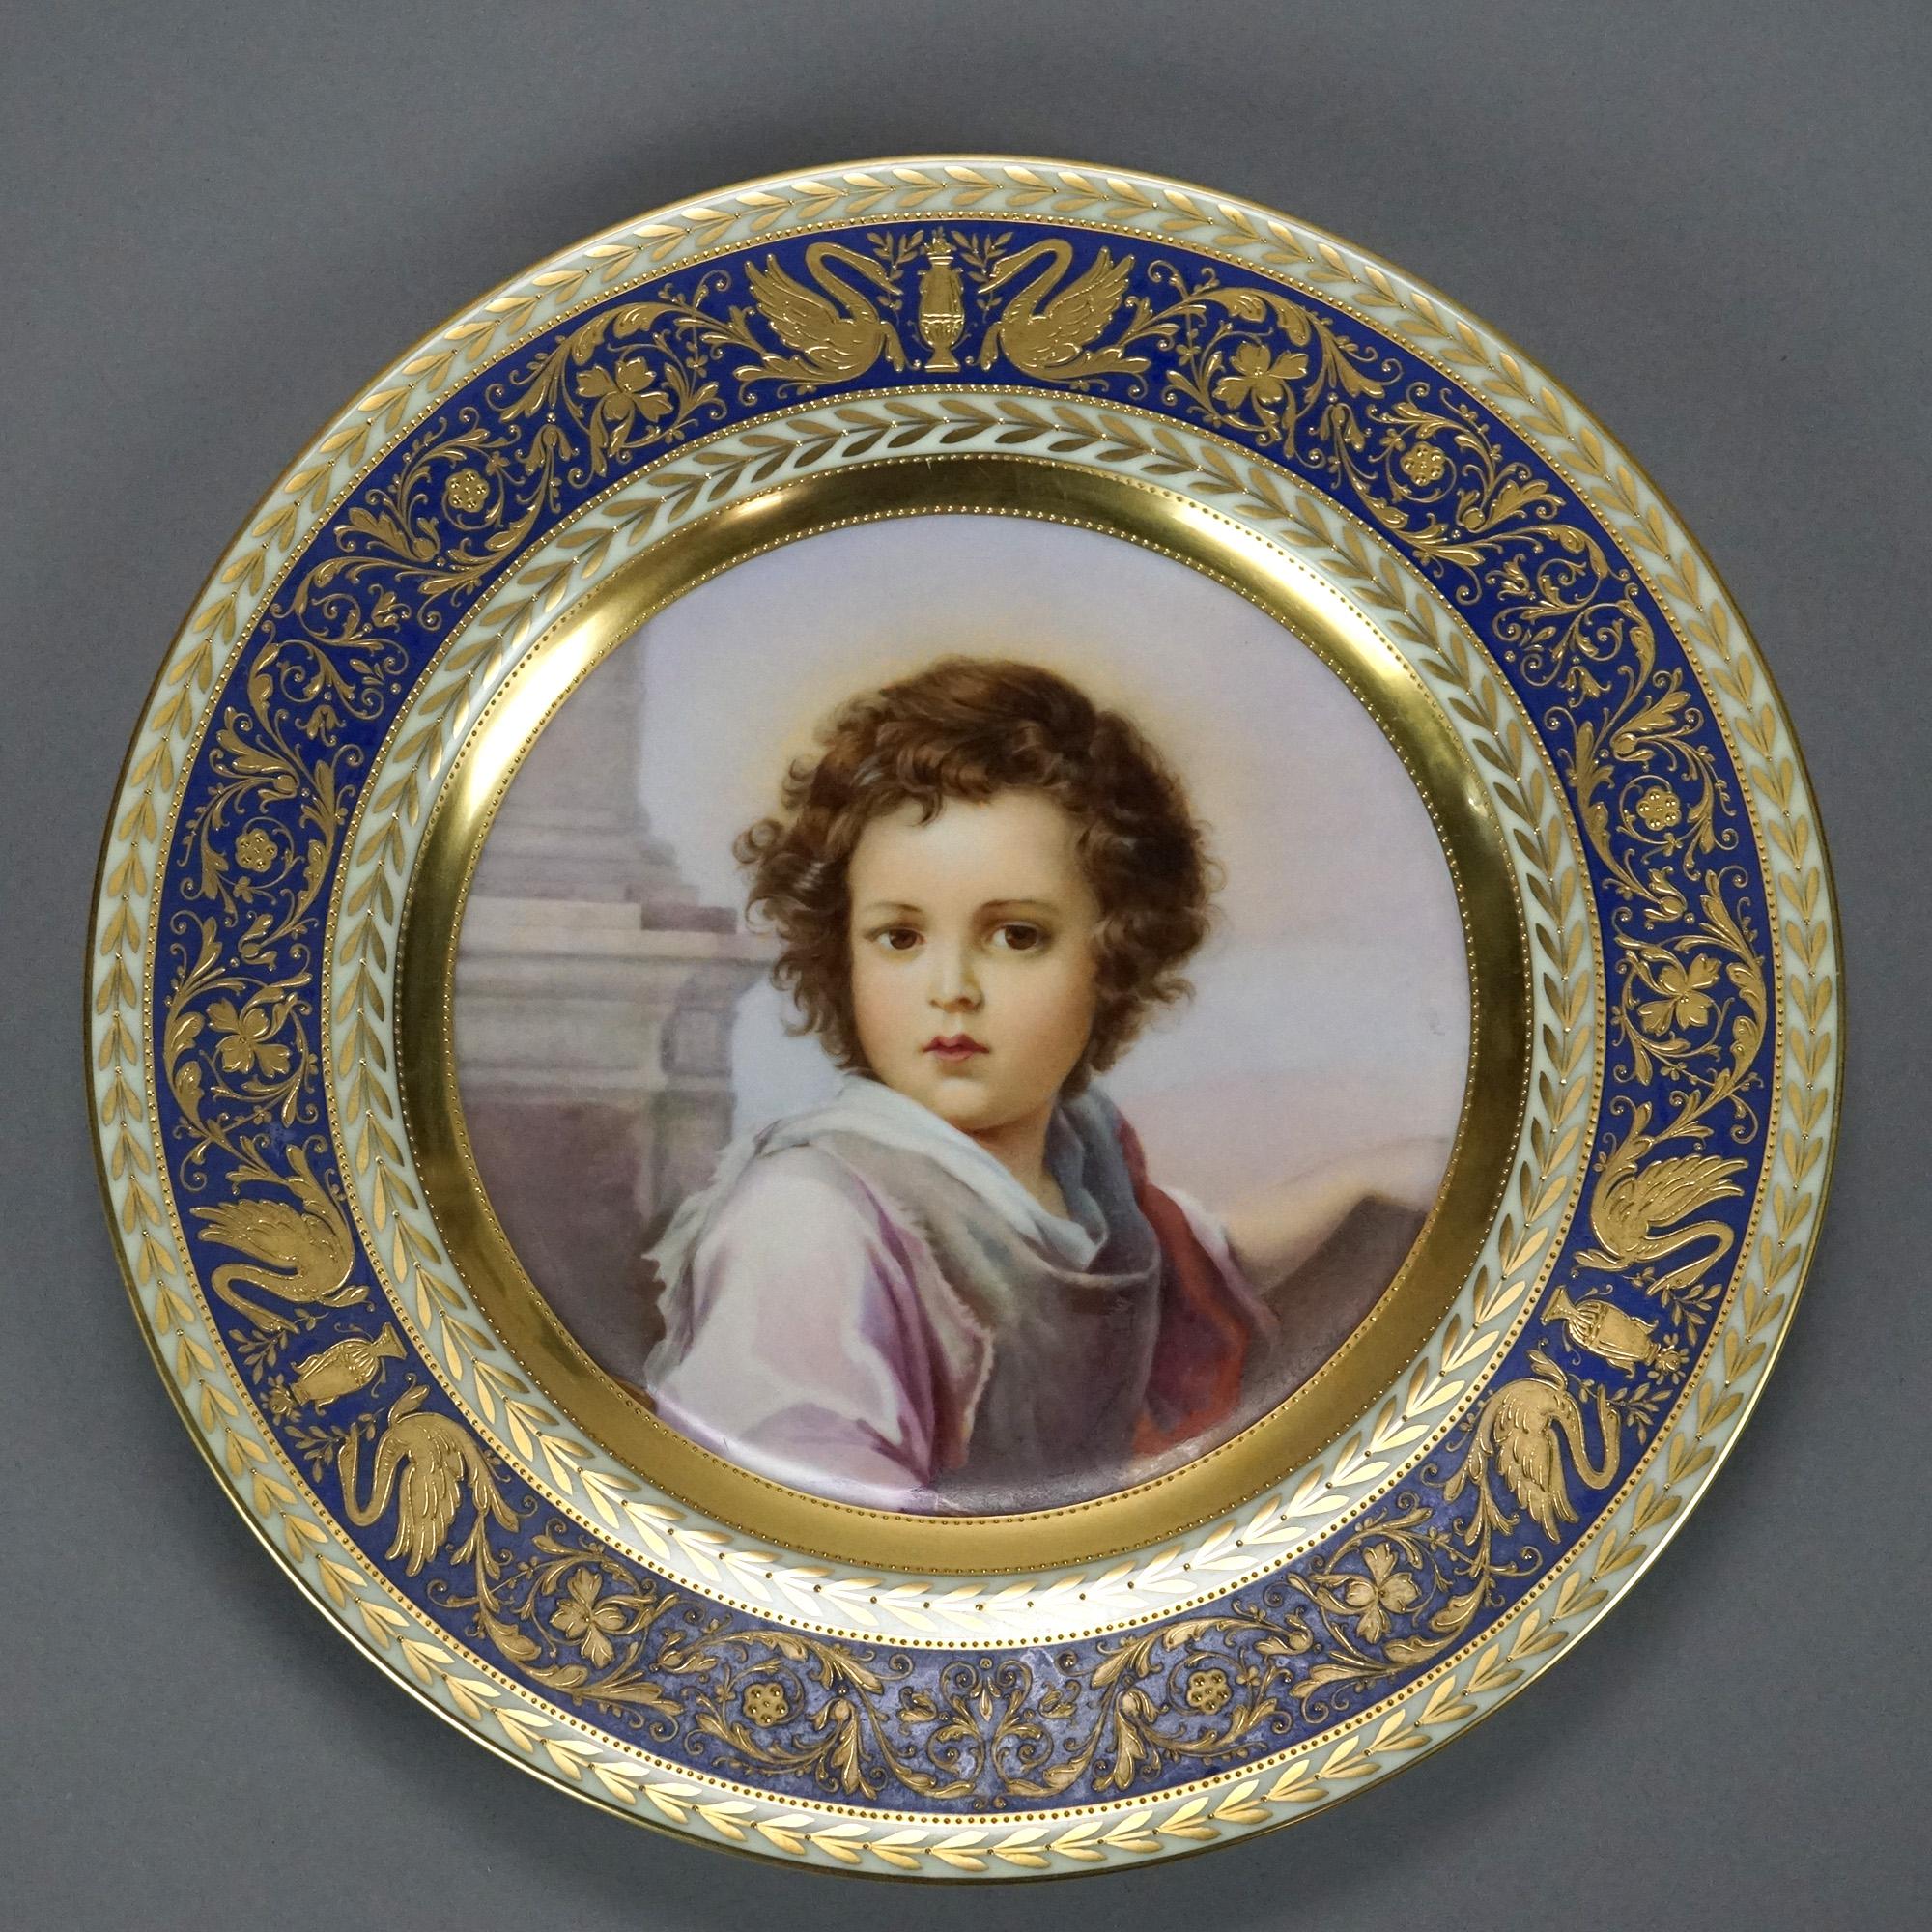 An antique Czech Royal Vienna School plate by Pirken Hammer offers porcelain construction with central portrait and gilt decorated surround, en verso maker mark and 